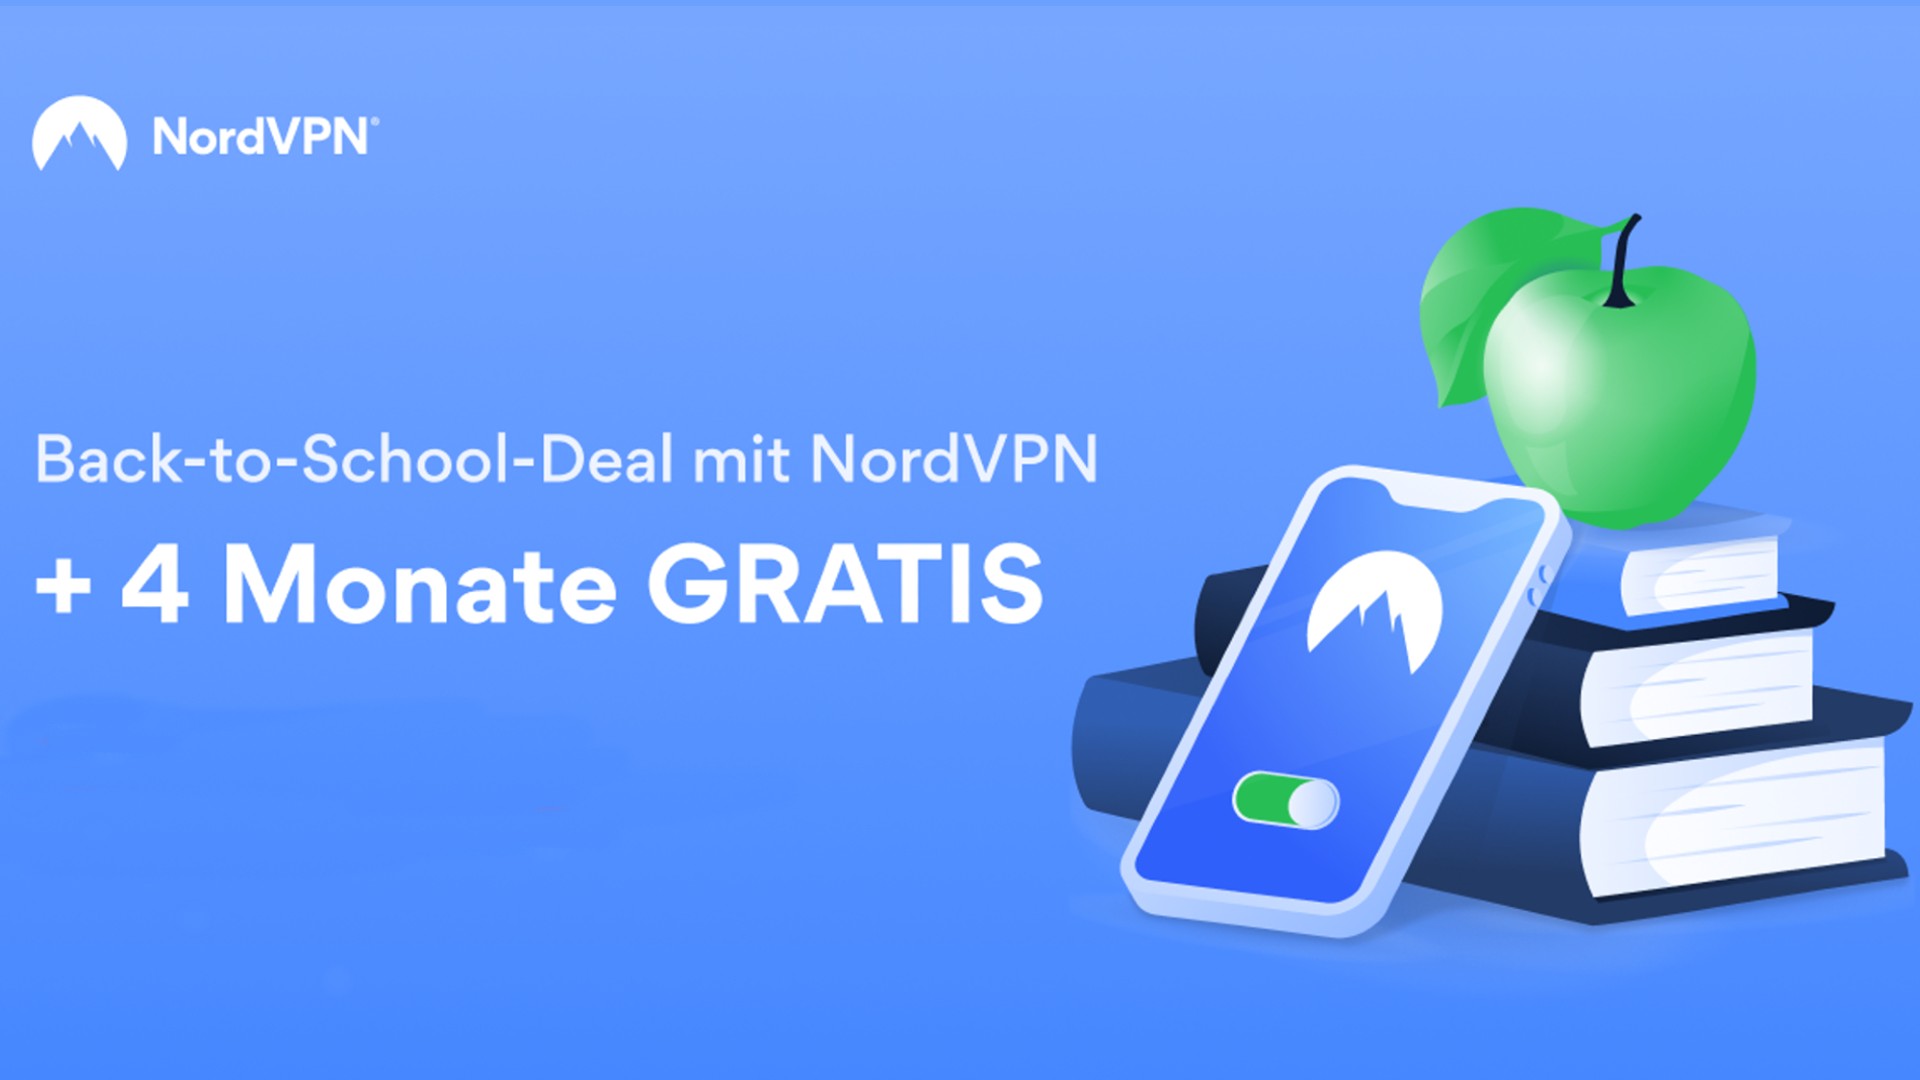 NordVPN: Now up to 69% discount and 4 months free on top